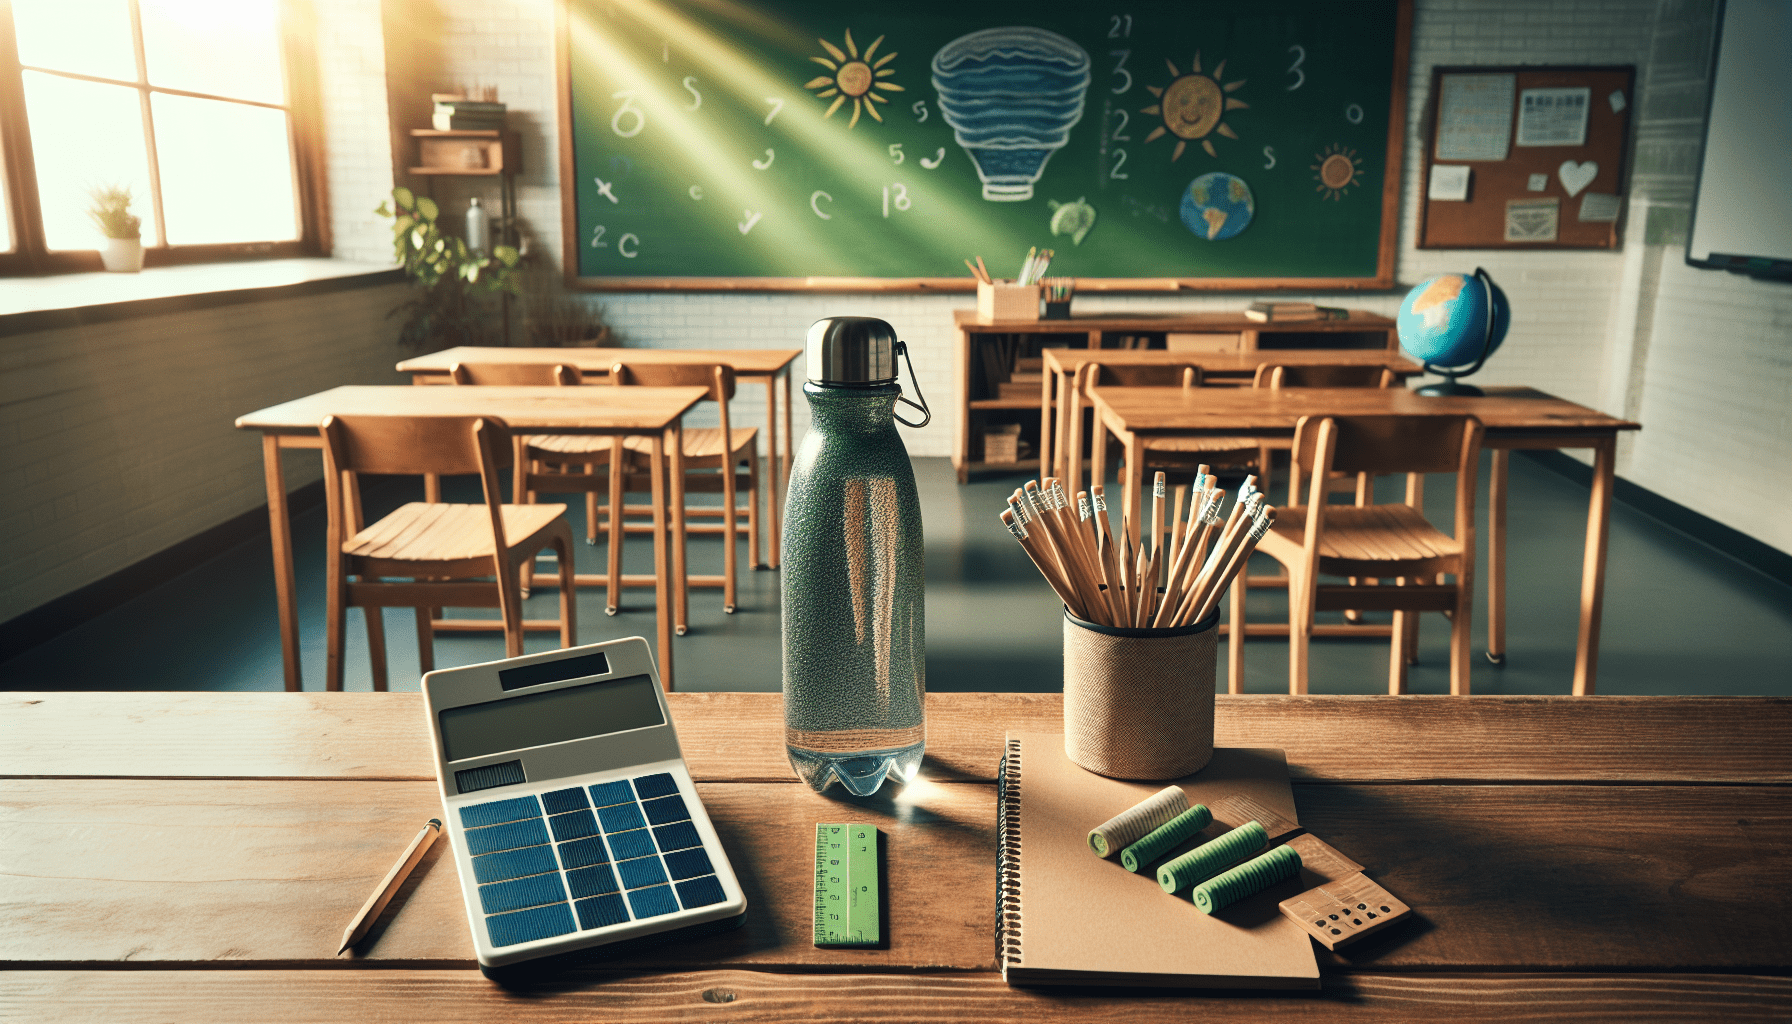 How Can I Reduce My Environmental Impact At School?